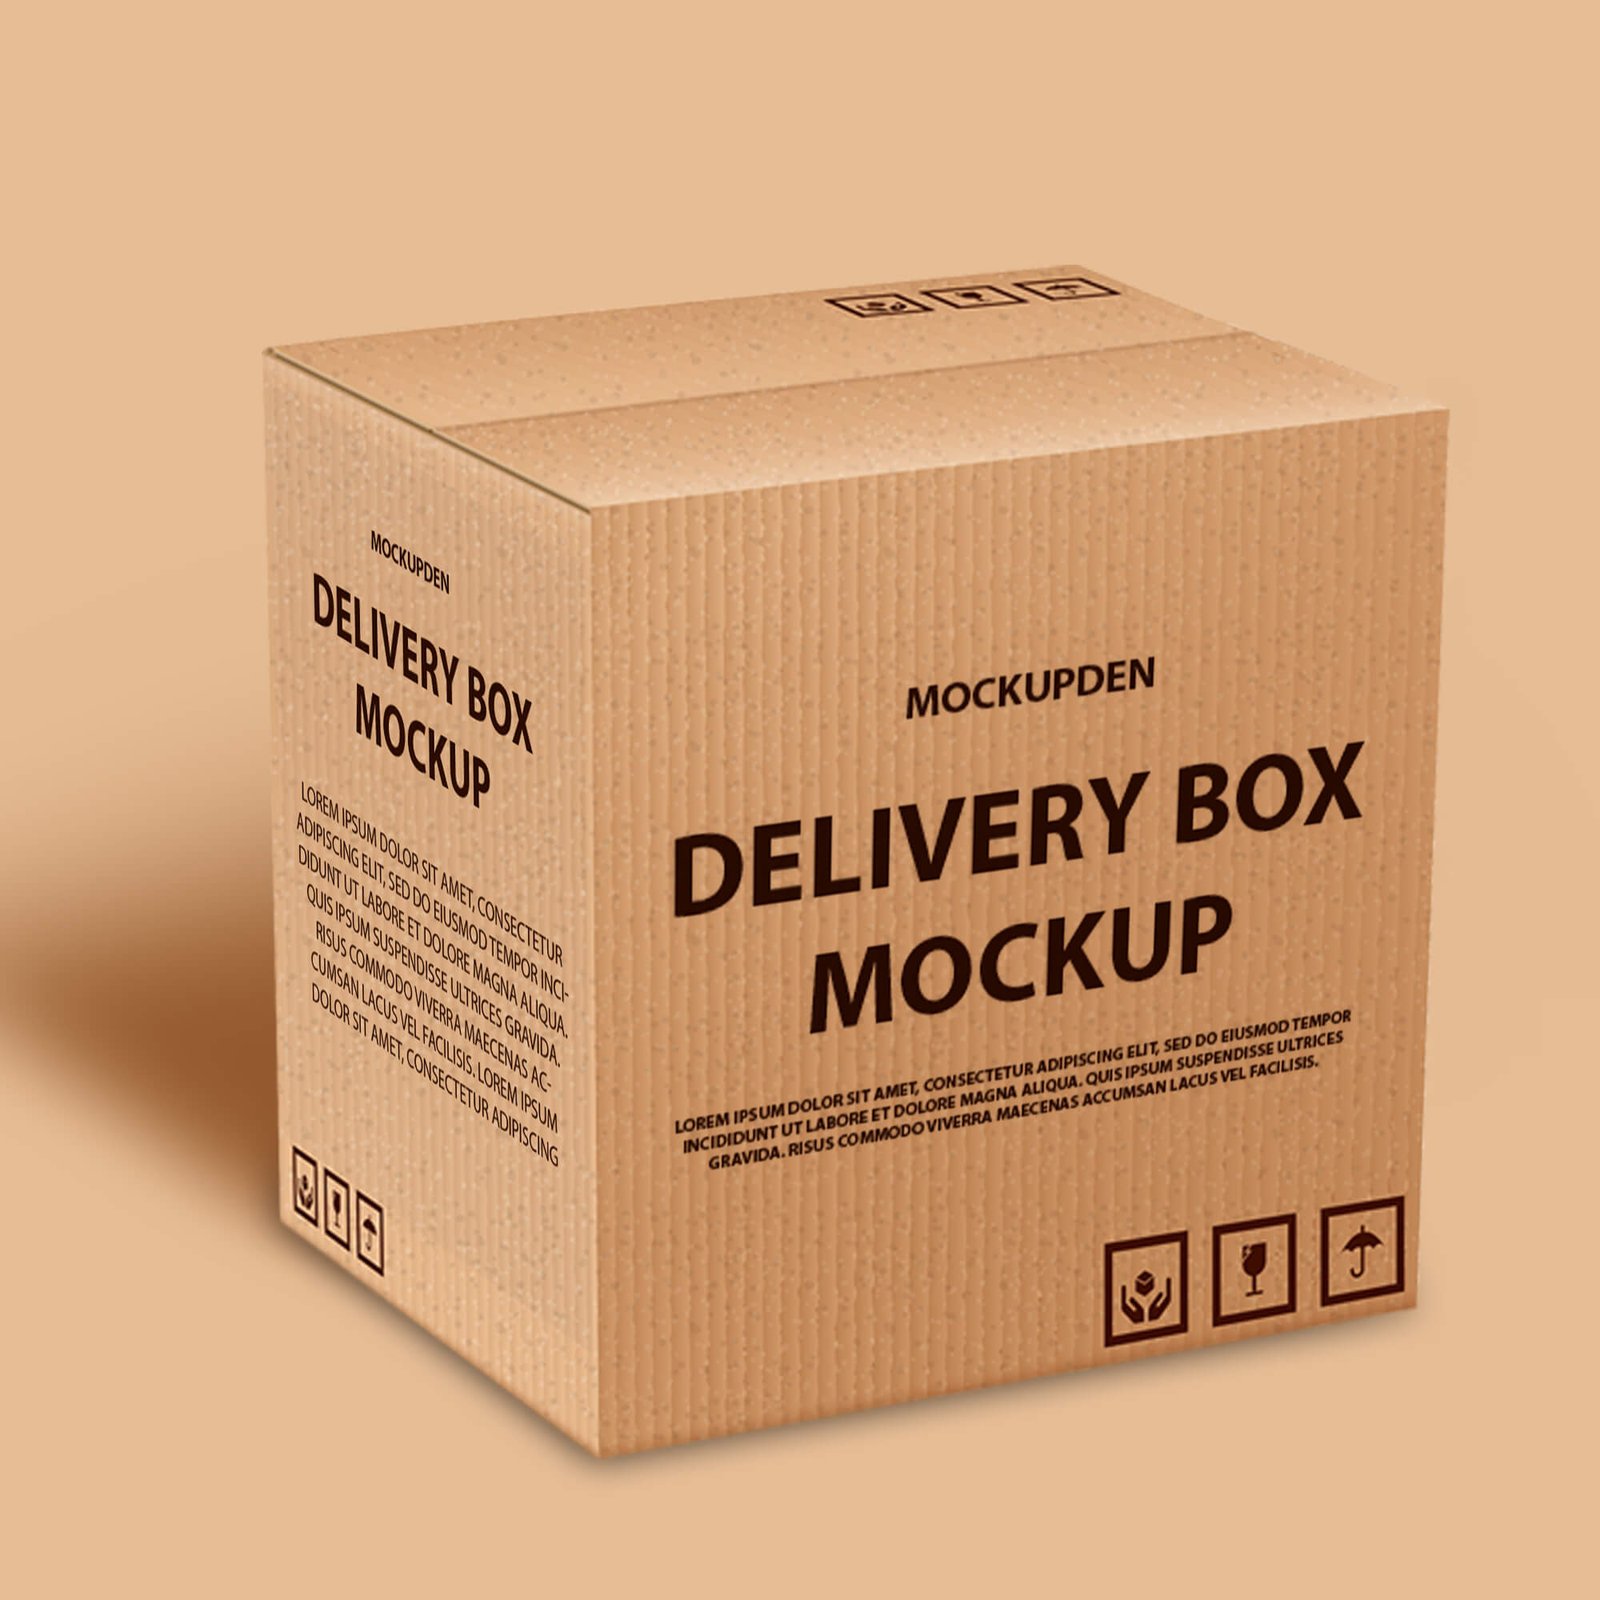 Design Free Delivery Box Mockup PSD Template